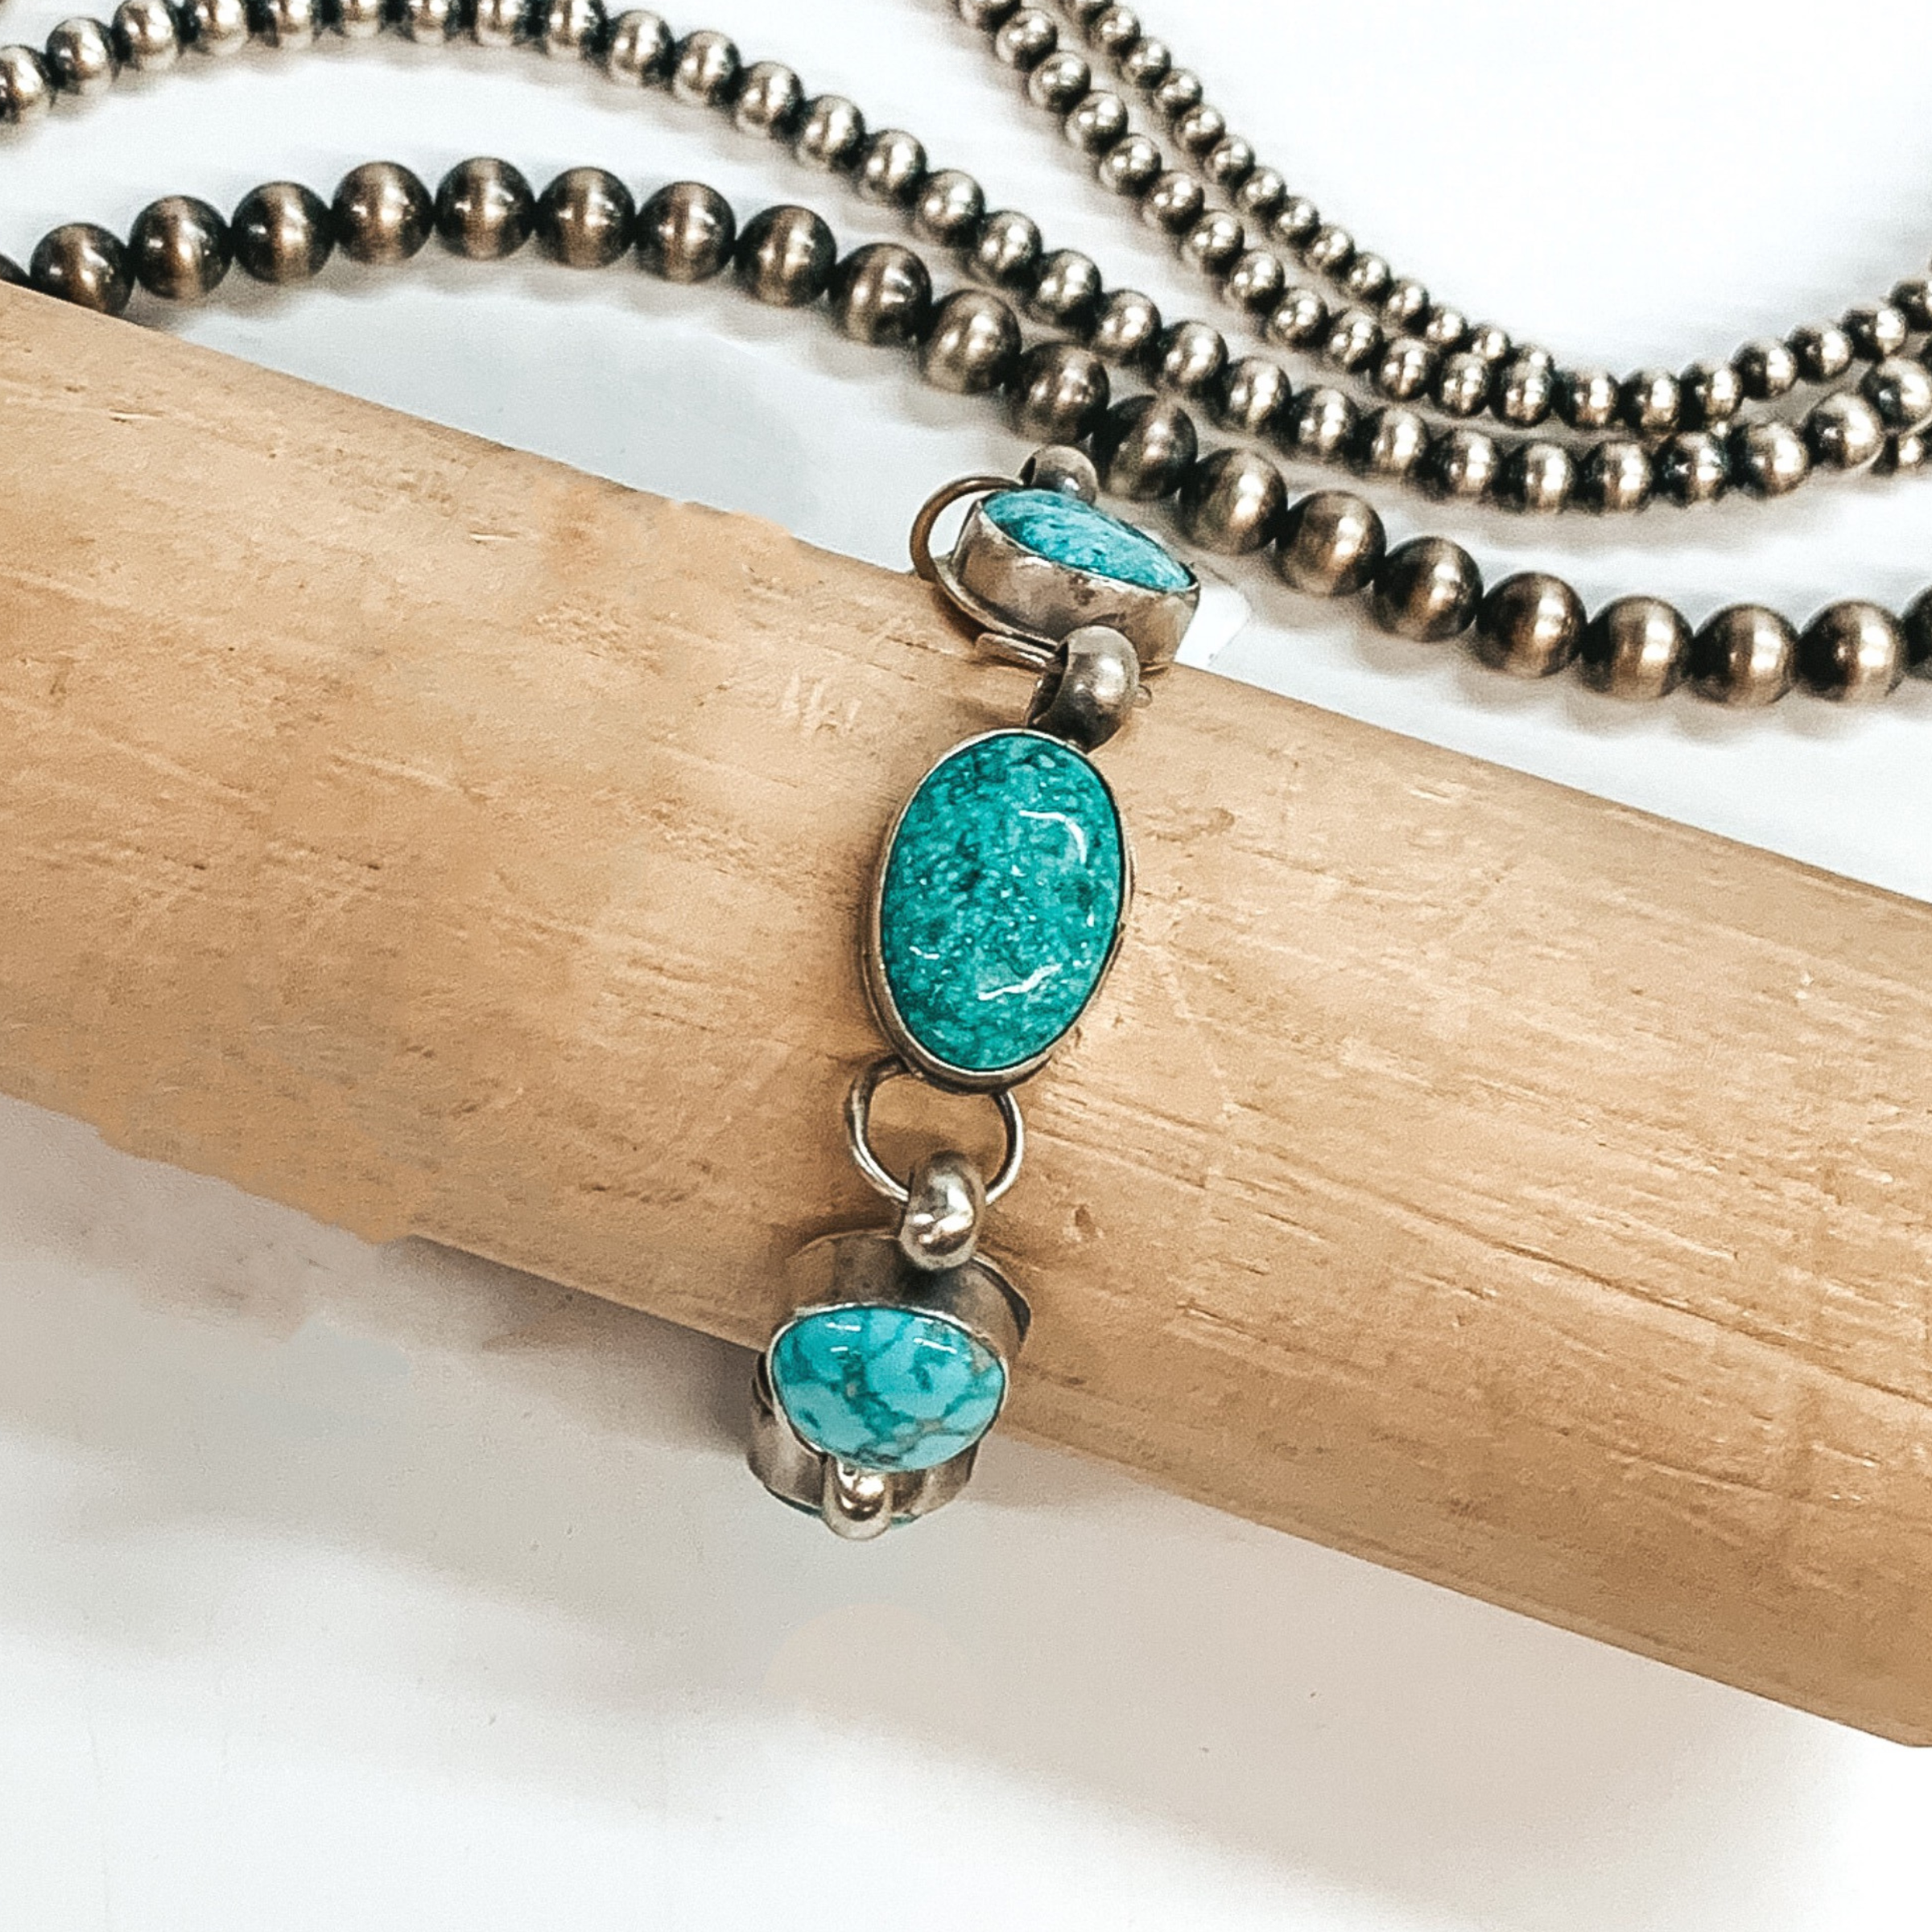 One sterling silver chain link bracelet with turquoise stones. This bracelet are pictured in a brown bracelet holder on a white background with silver beads behind it.